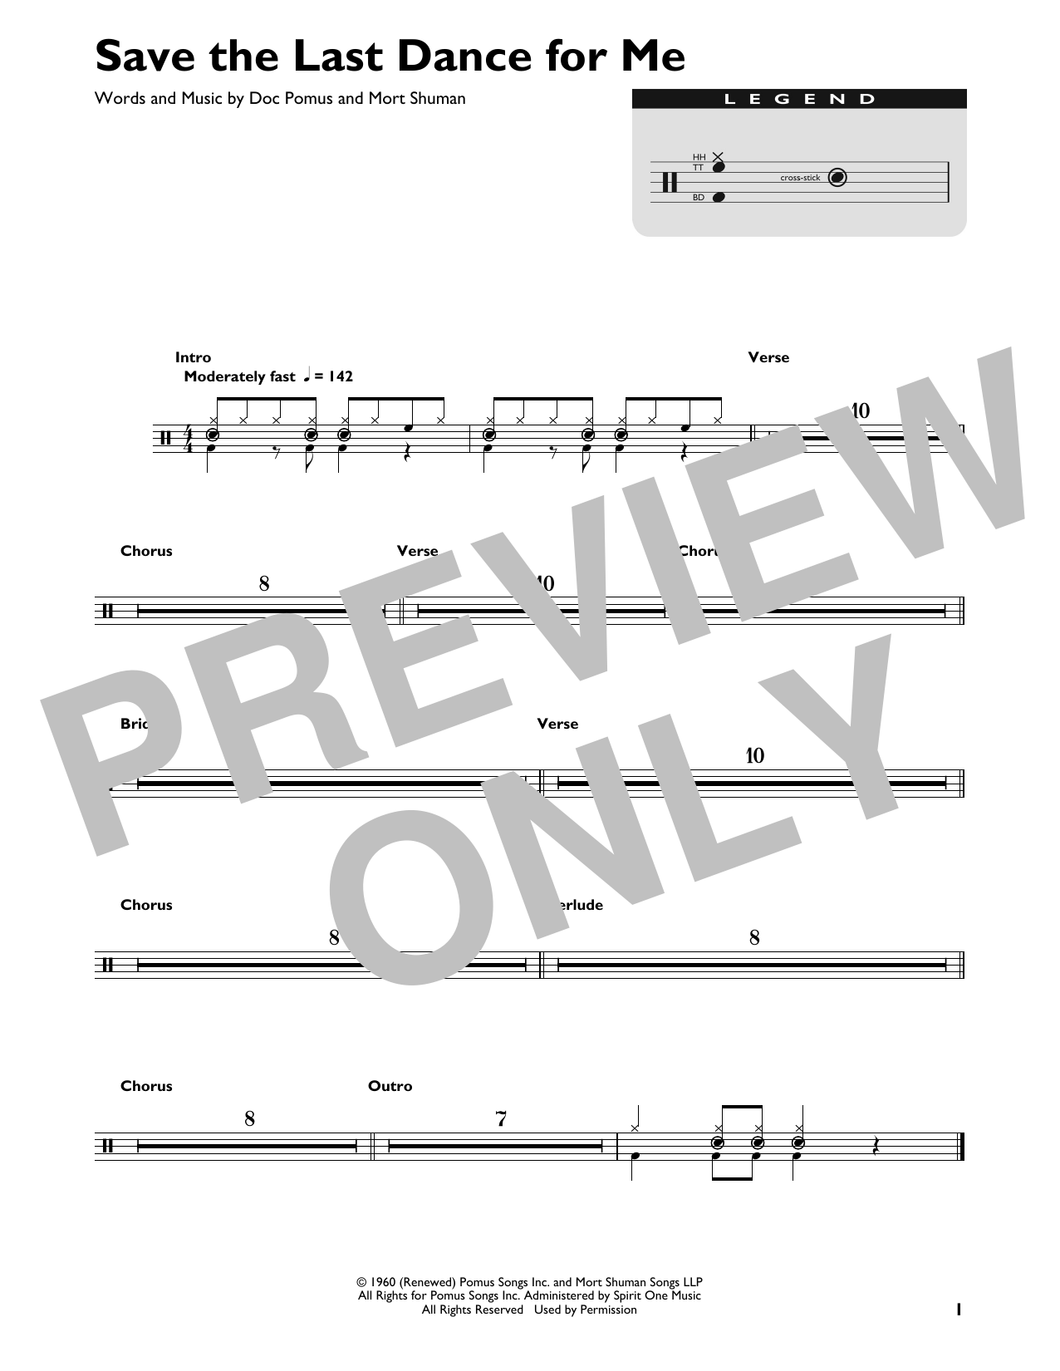 Save the Last Dance for Me - The Drifters - Full Drum Transcription / Drum Sheet Music - SheetMusicDirect DT